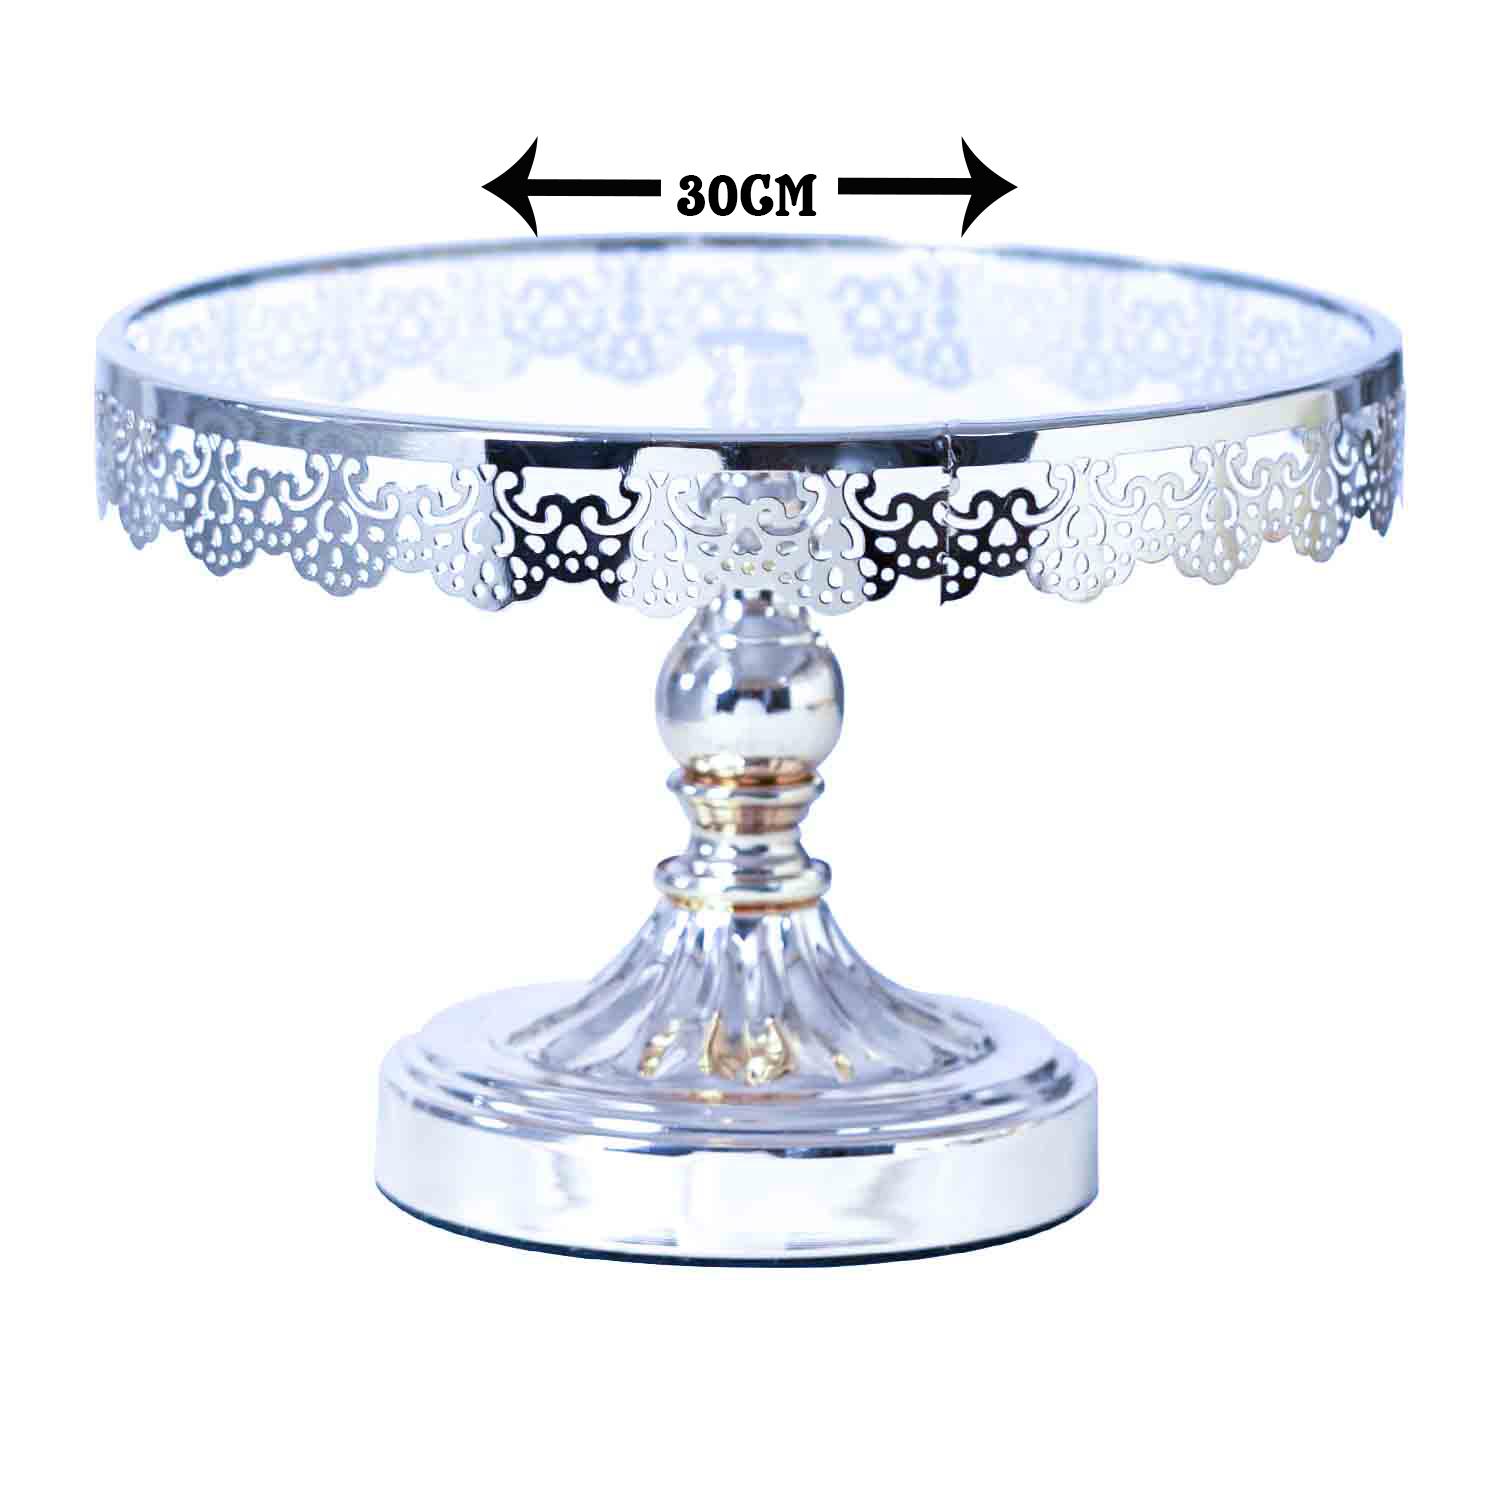 1PC SILVER CLEAR GLASS TOP CAKE STAND DIAMETER 30CM